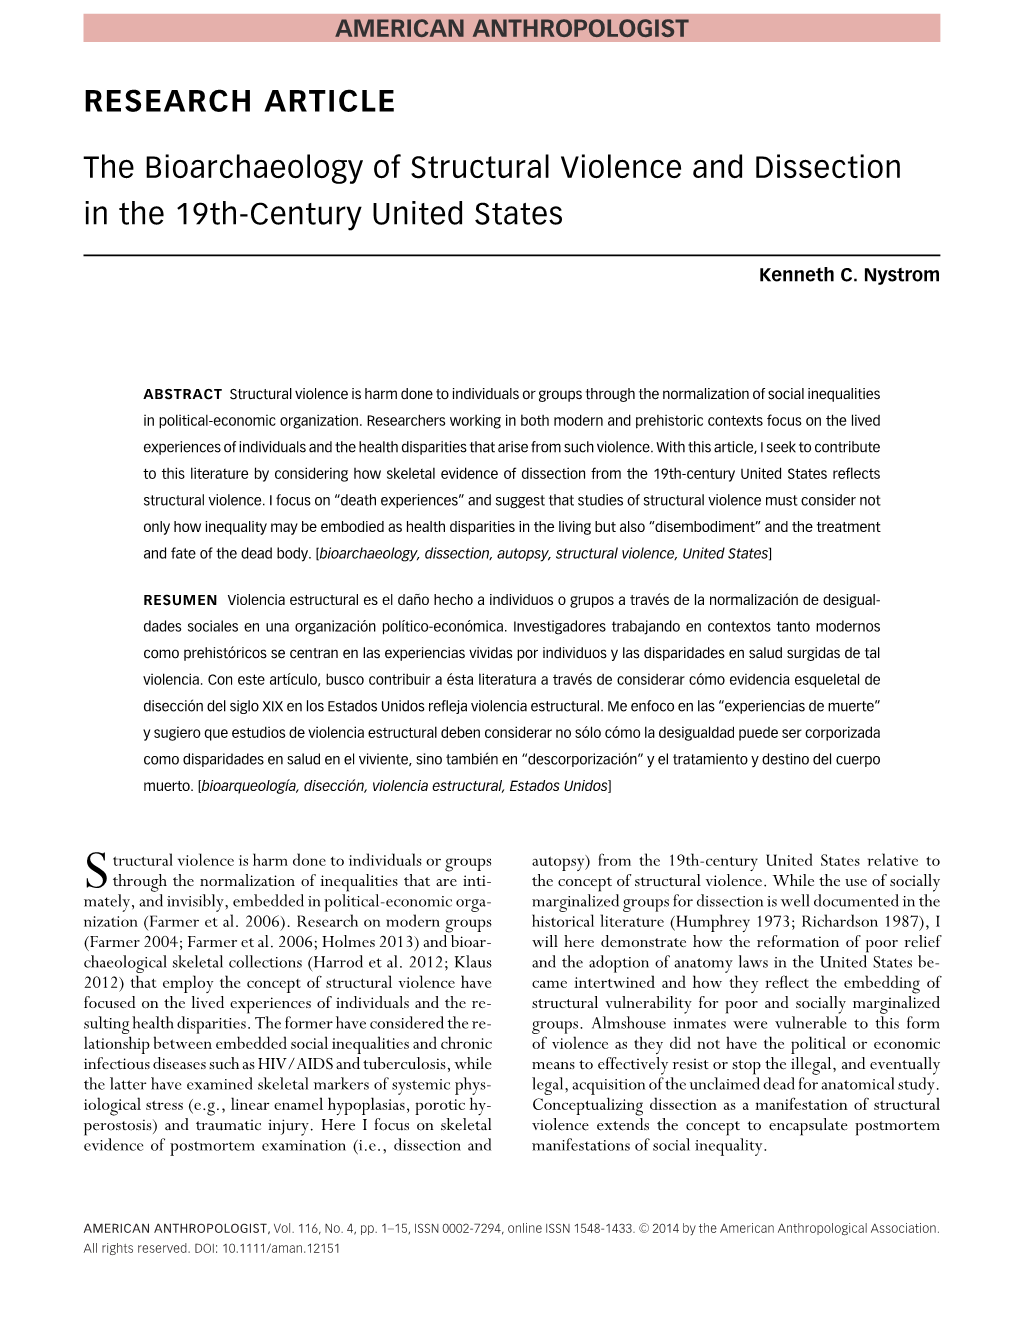 The Bioarchaeology of Structural Violence and Dissection in the 19Th-Century United States